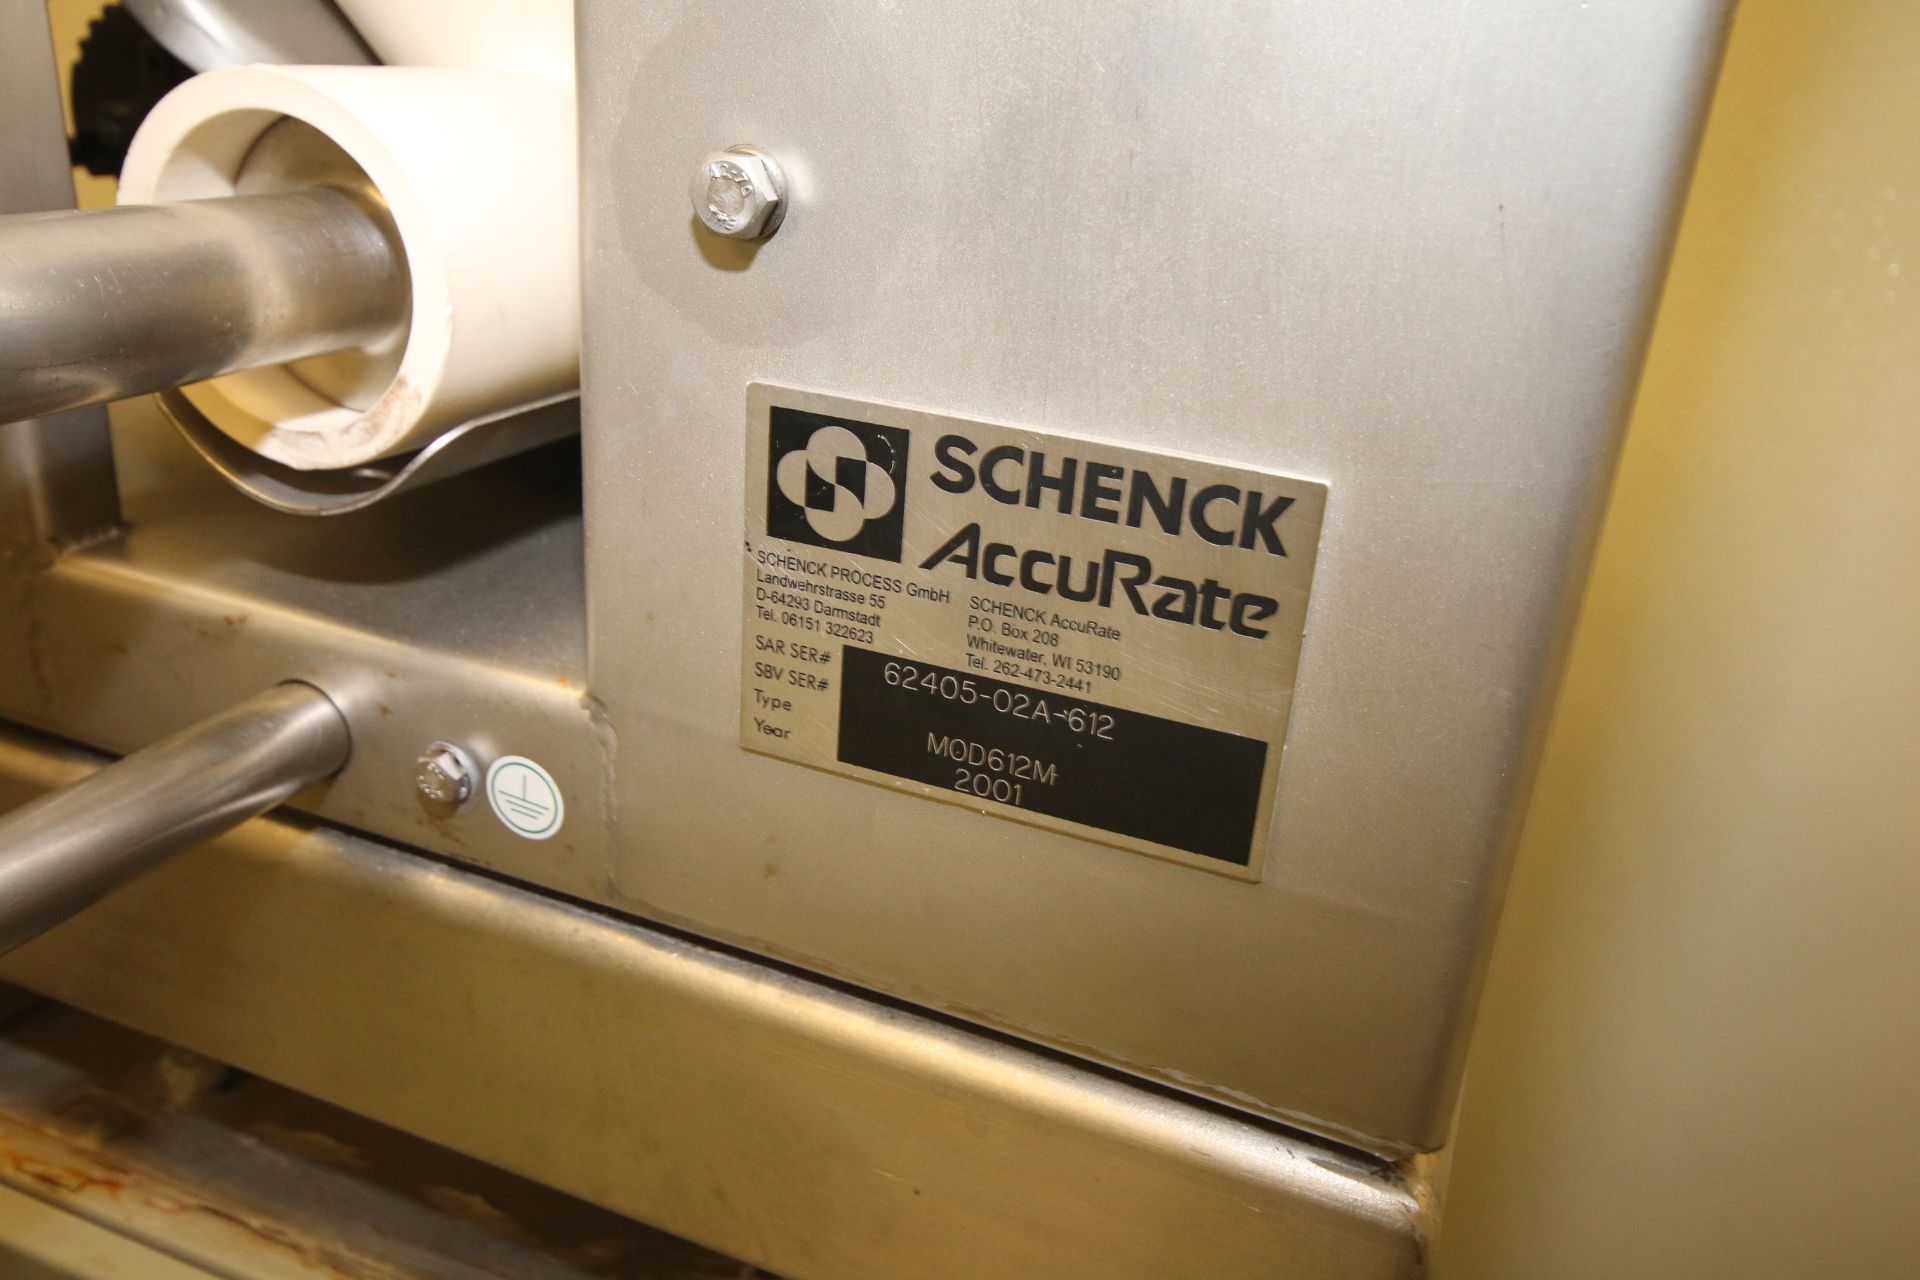 Schenck Accurate Volumetric Dry Material Screw Feeder, M/N 612M, S/N 62405-02A-612, with S/S - Image 3 of 4